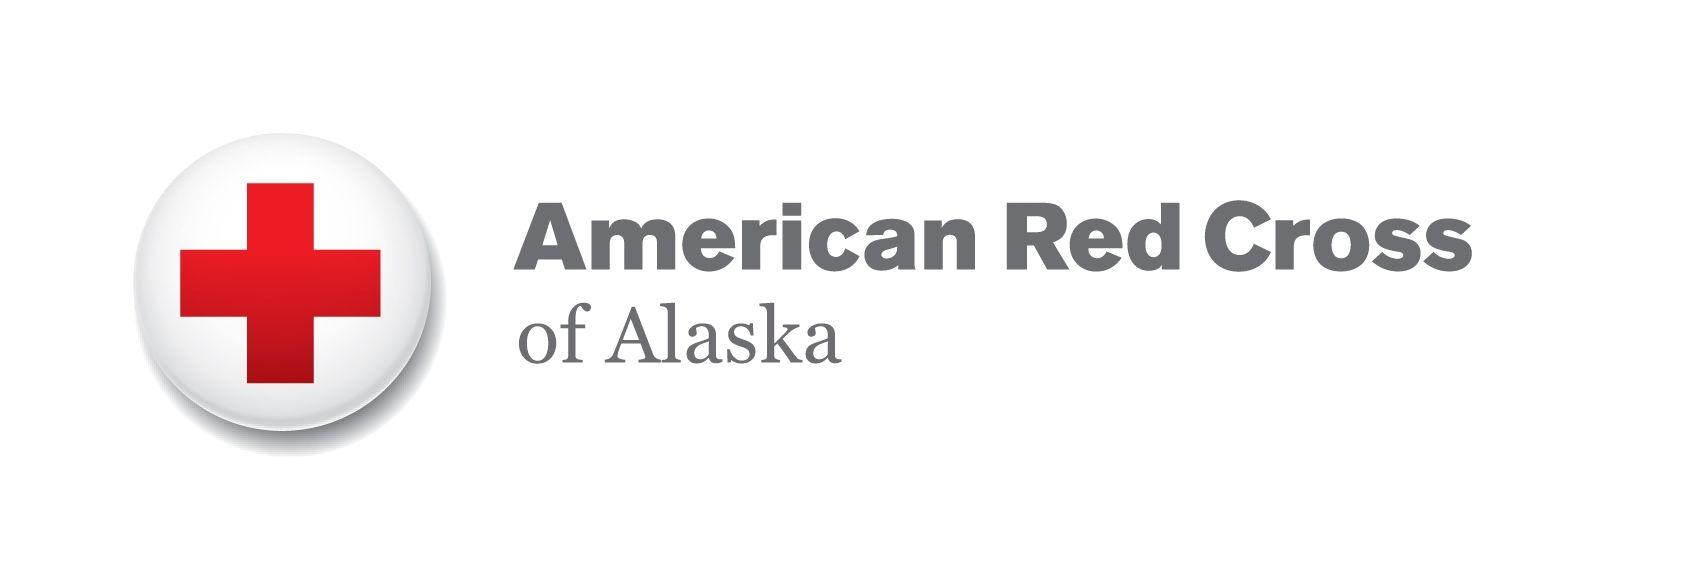 Army Red Cross Logo - Red Cross of Alaska – Hearts Open. Sleeves Up. Helping Those In Need.